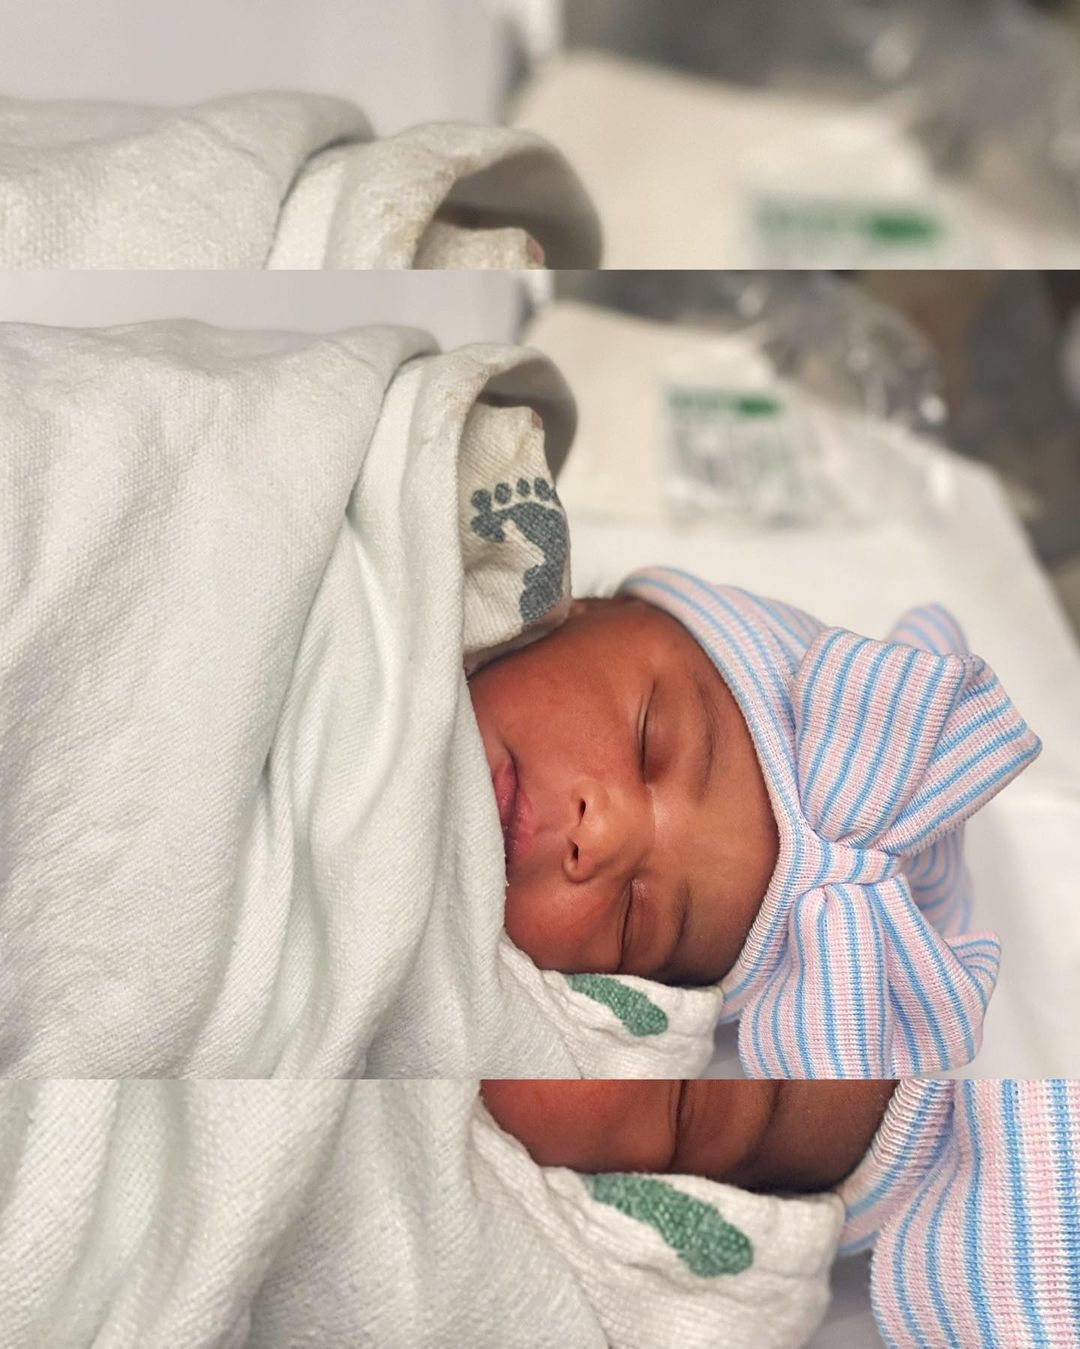 Comedian Ajebo and wife welcomes baby girl (Photos)